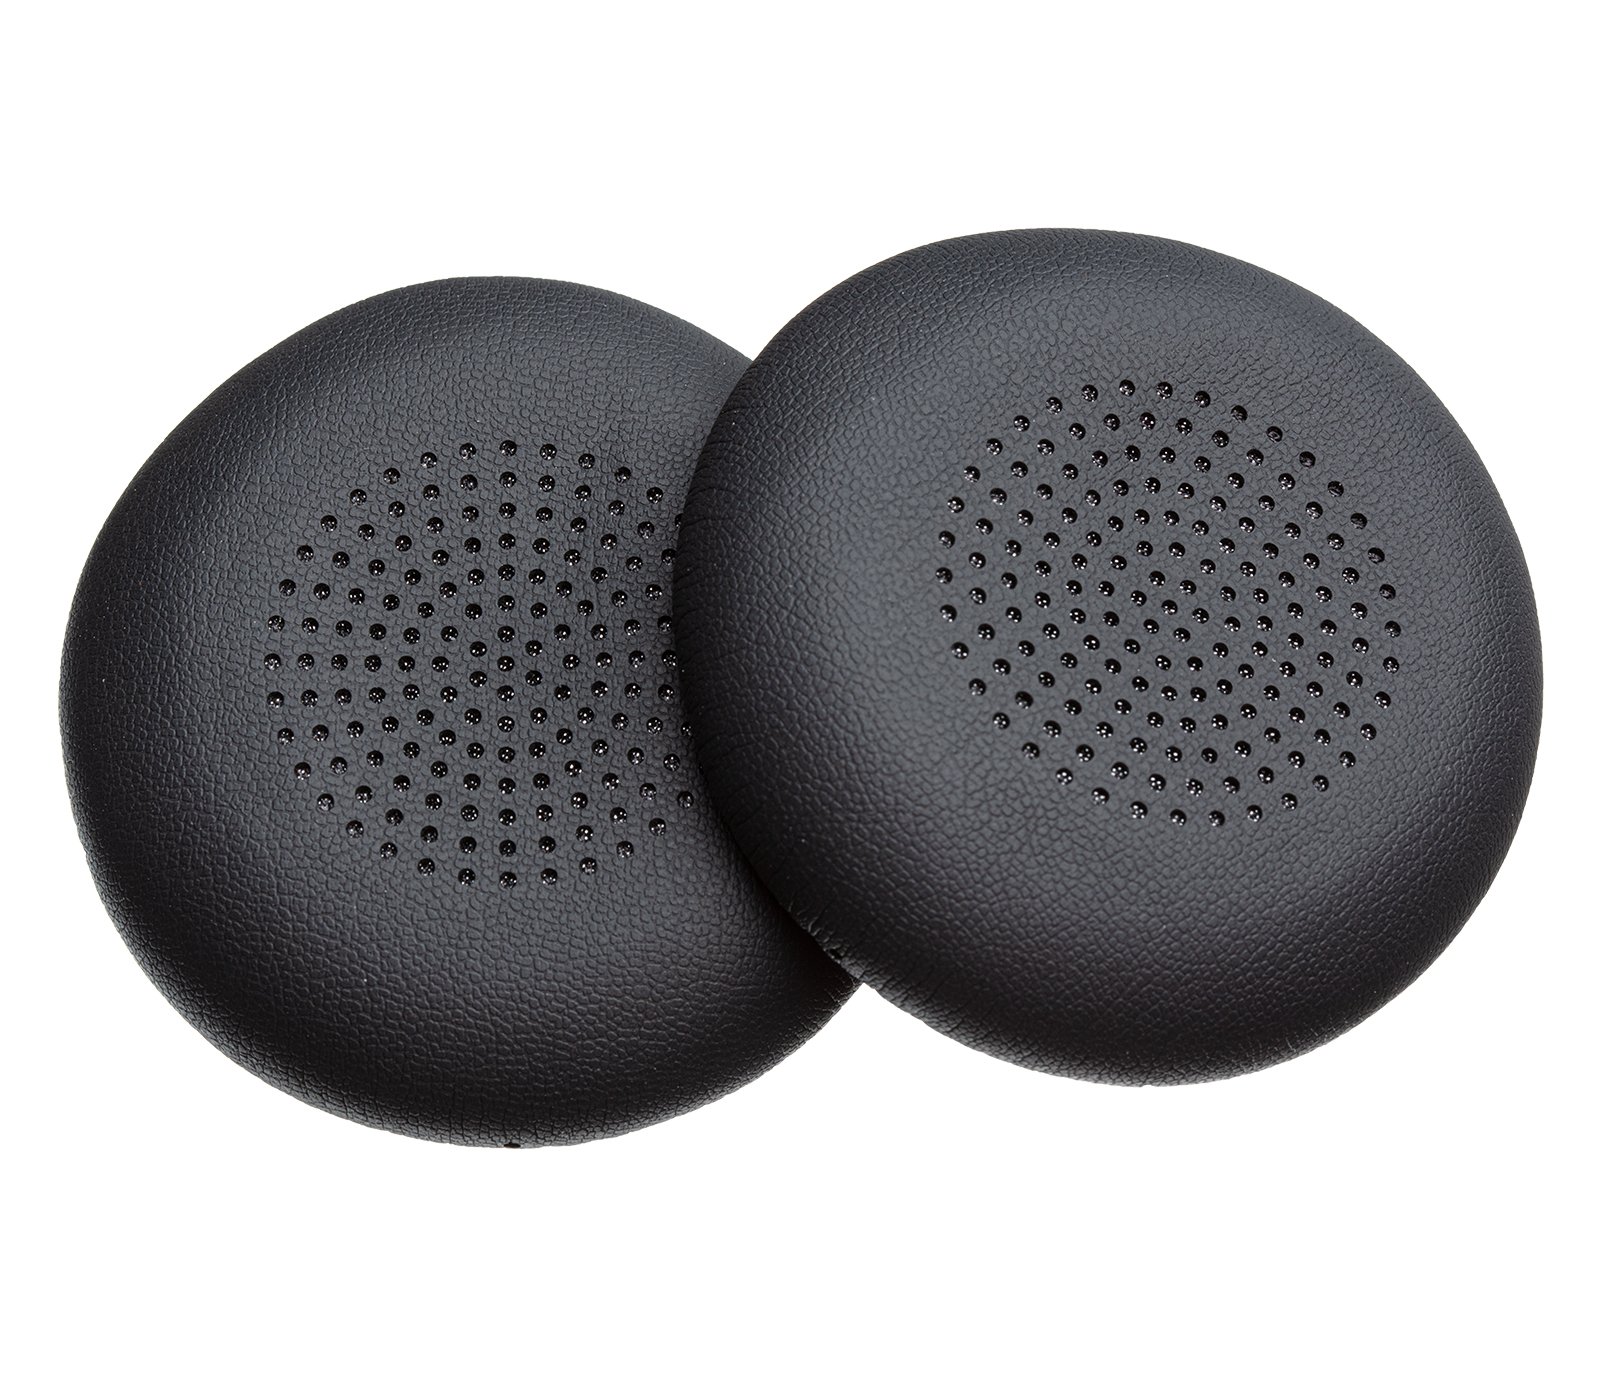 Logitech Zone Wireless/Plus Replacement Earpad Covers - 989-000942